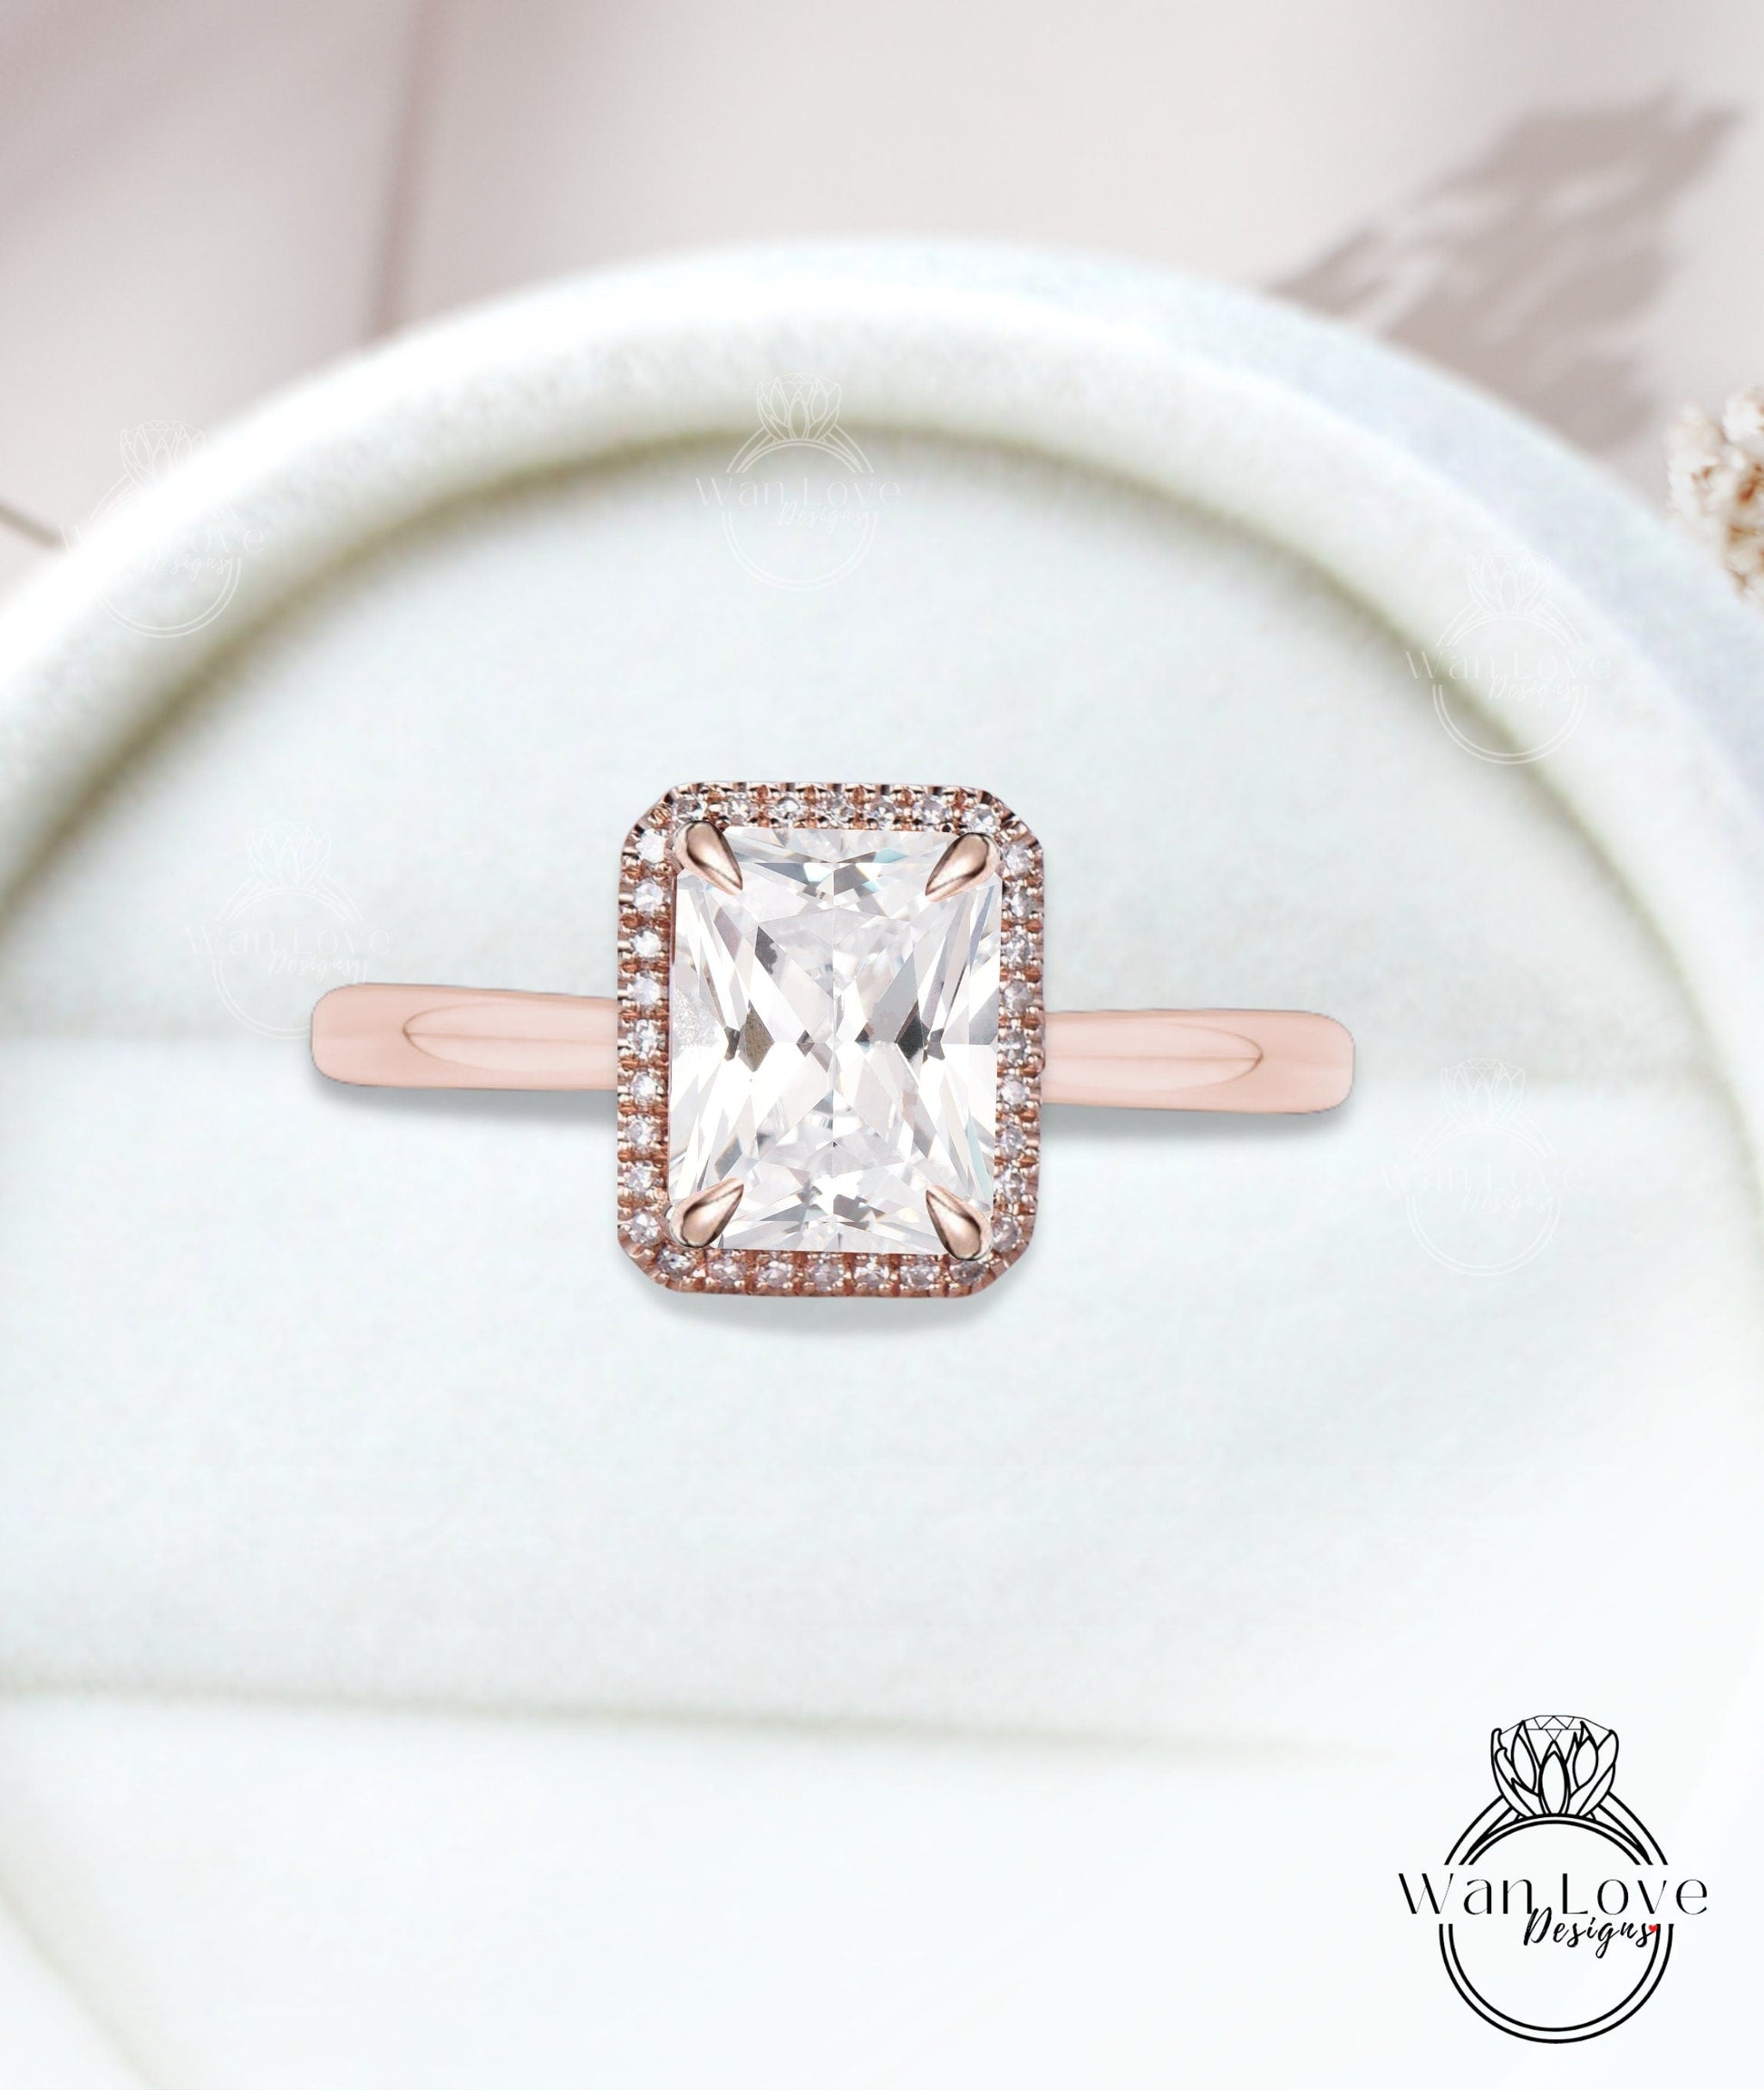 Emerald cut White Sapphire engagement ring rose gold halo ring diamond halo tapered plain thin dainty band art deco anniversary promise ring Wan Love Designs